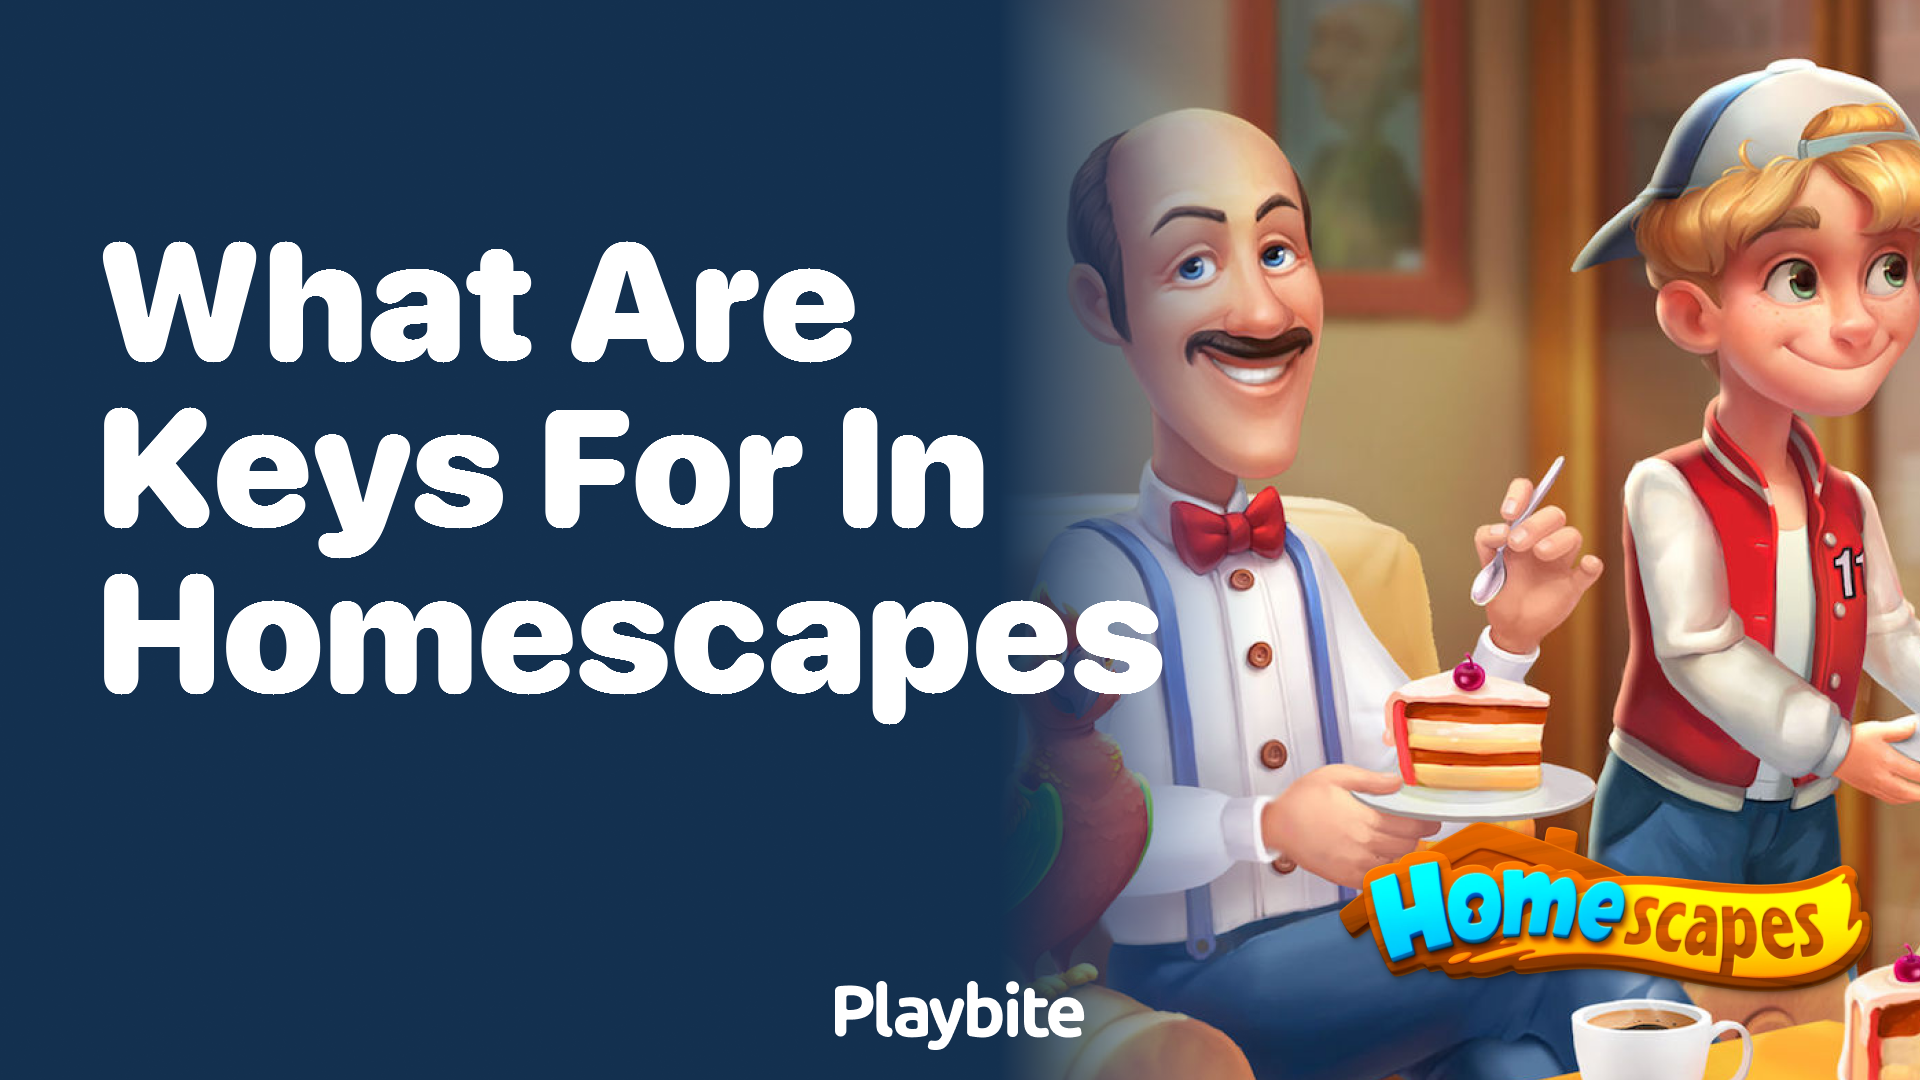 What are keys for in Homescapes?